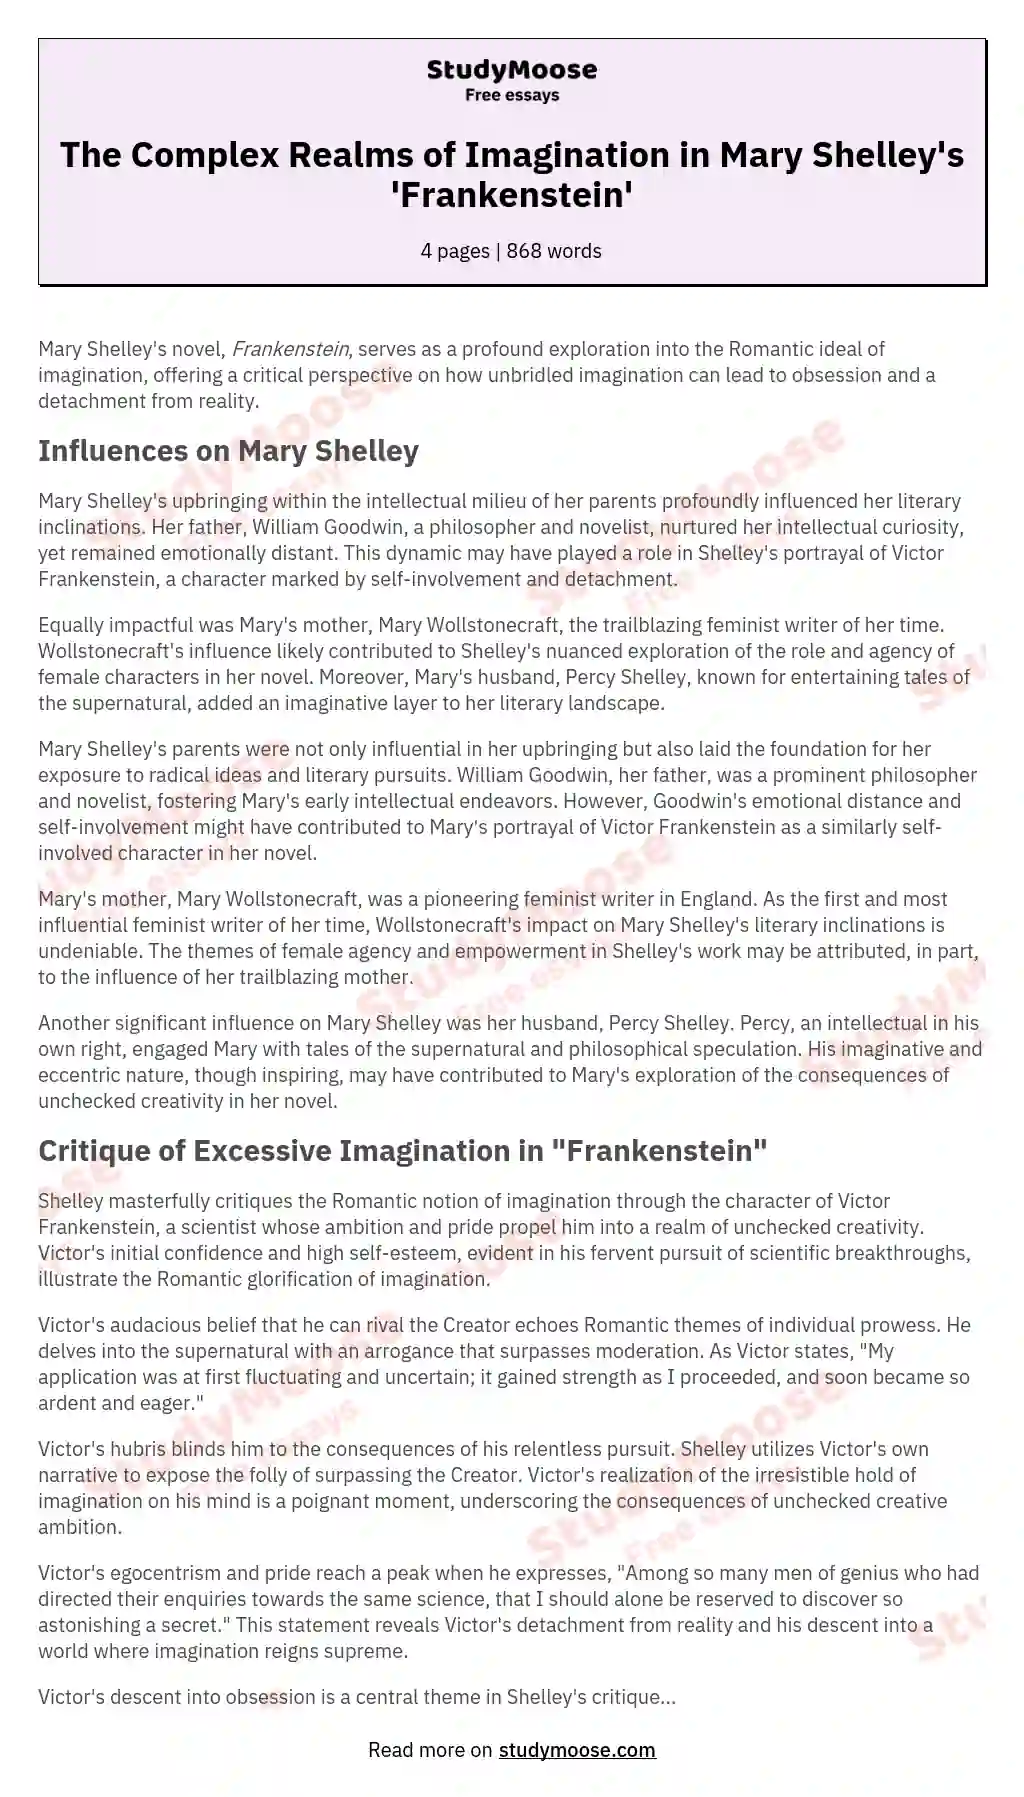 Imagination vs. Obsession in Mary Shelley’s Frankenstein